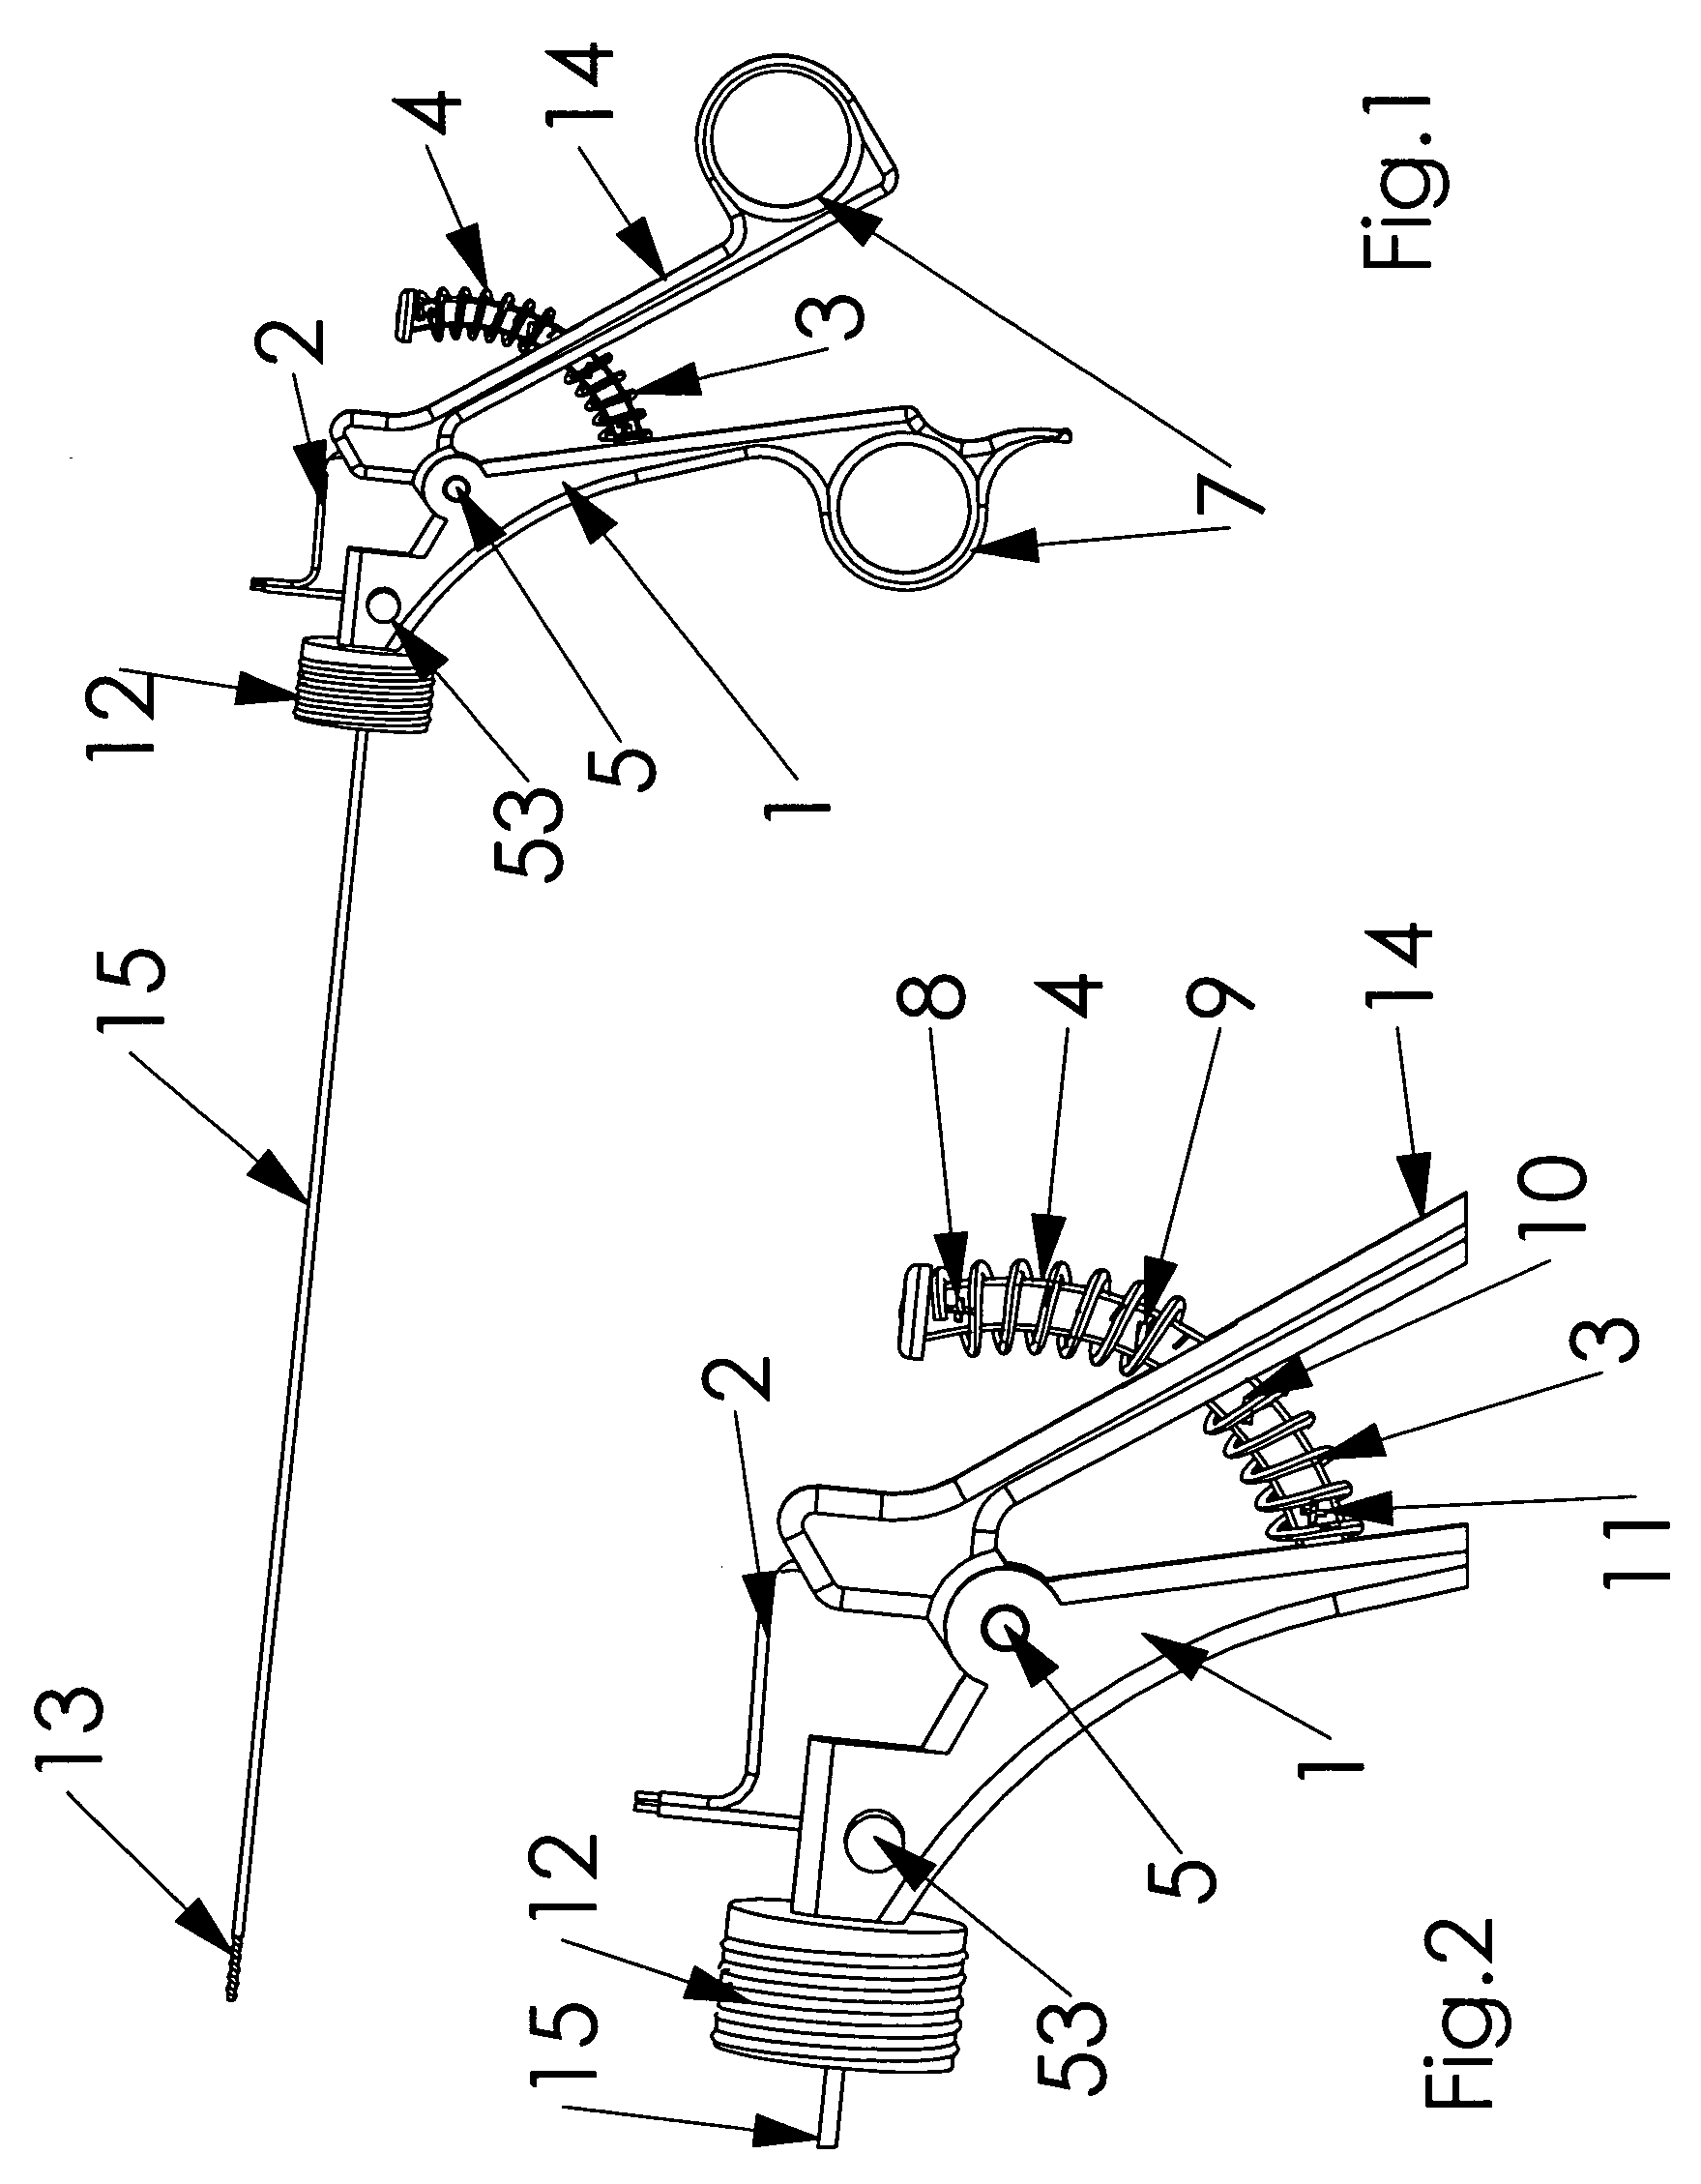 Multi-purpose minimally invasive instrument that uses a micro entry port